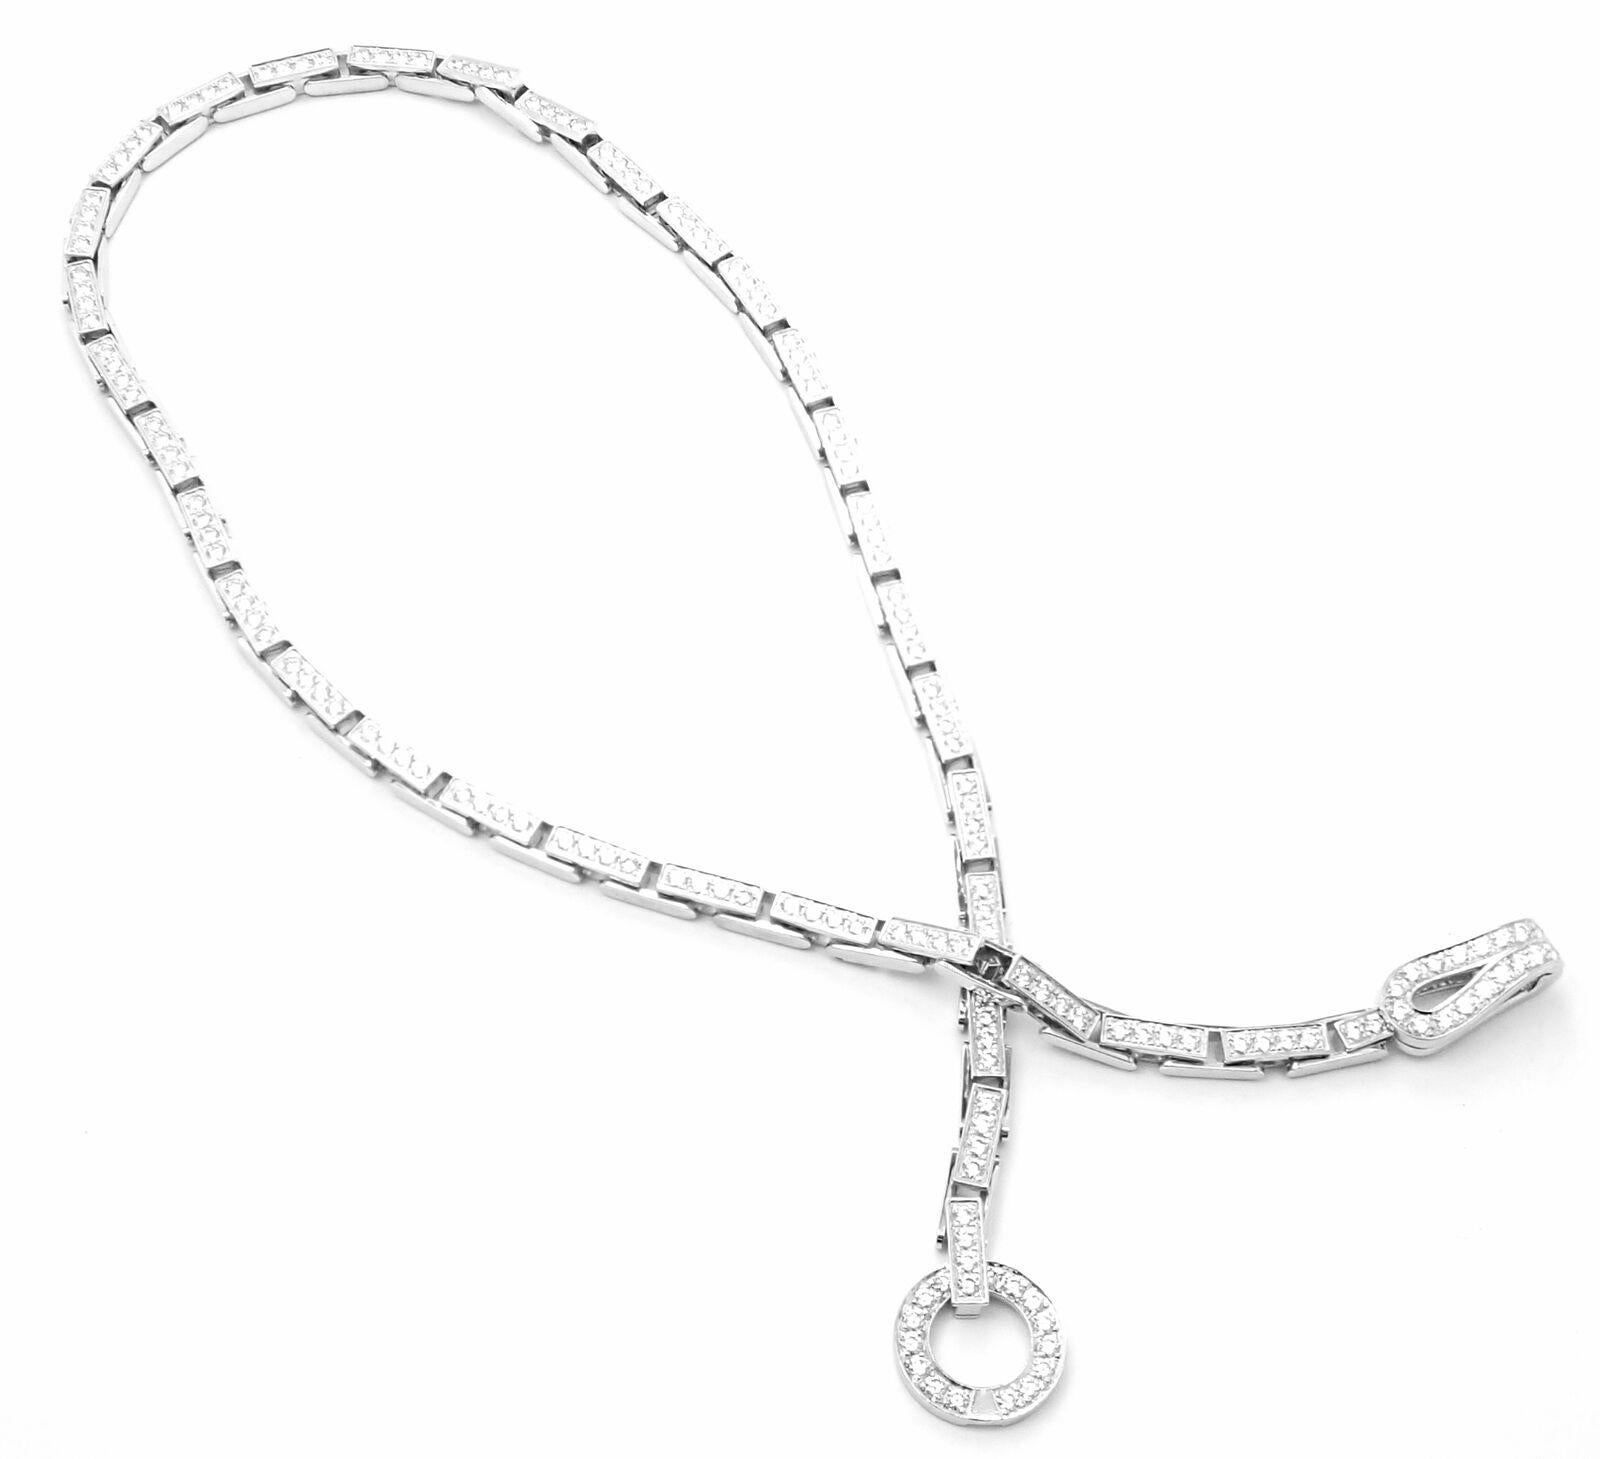 Cartier Agrafe Full Diamond Link White Gold Necklace Certificate For Sale 1